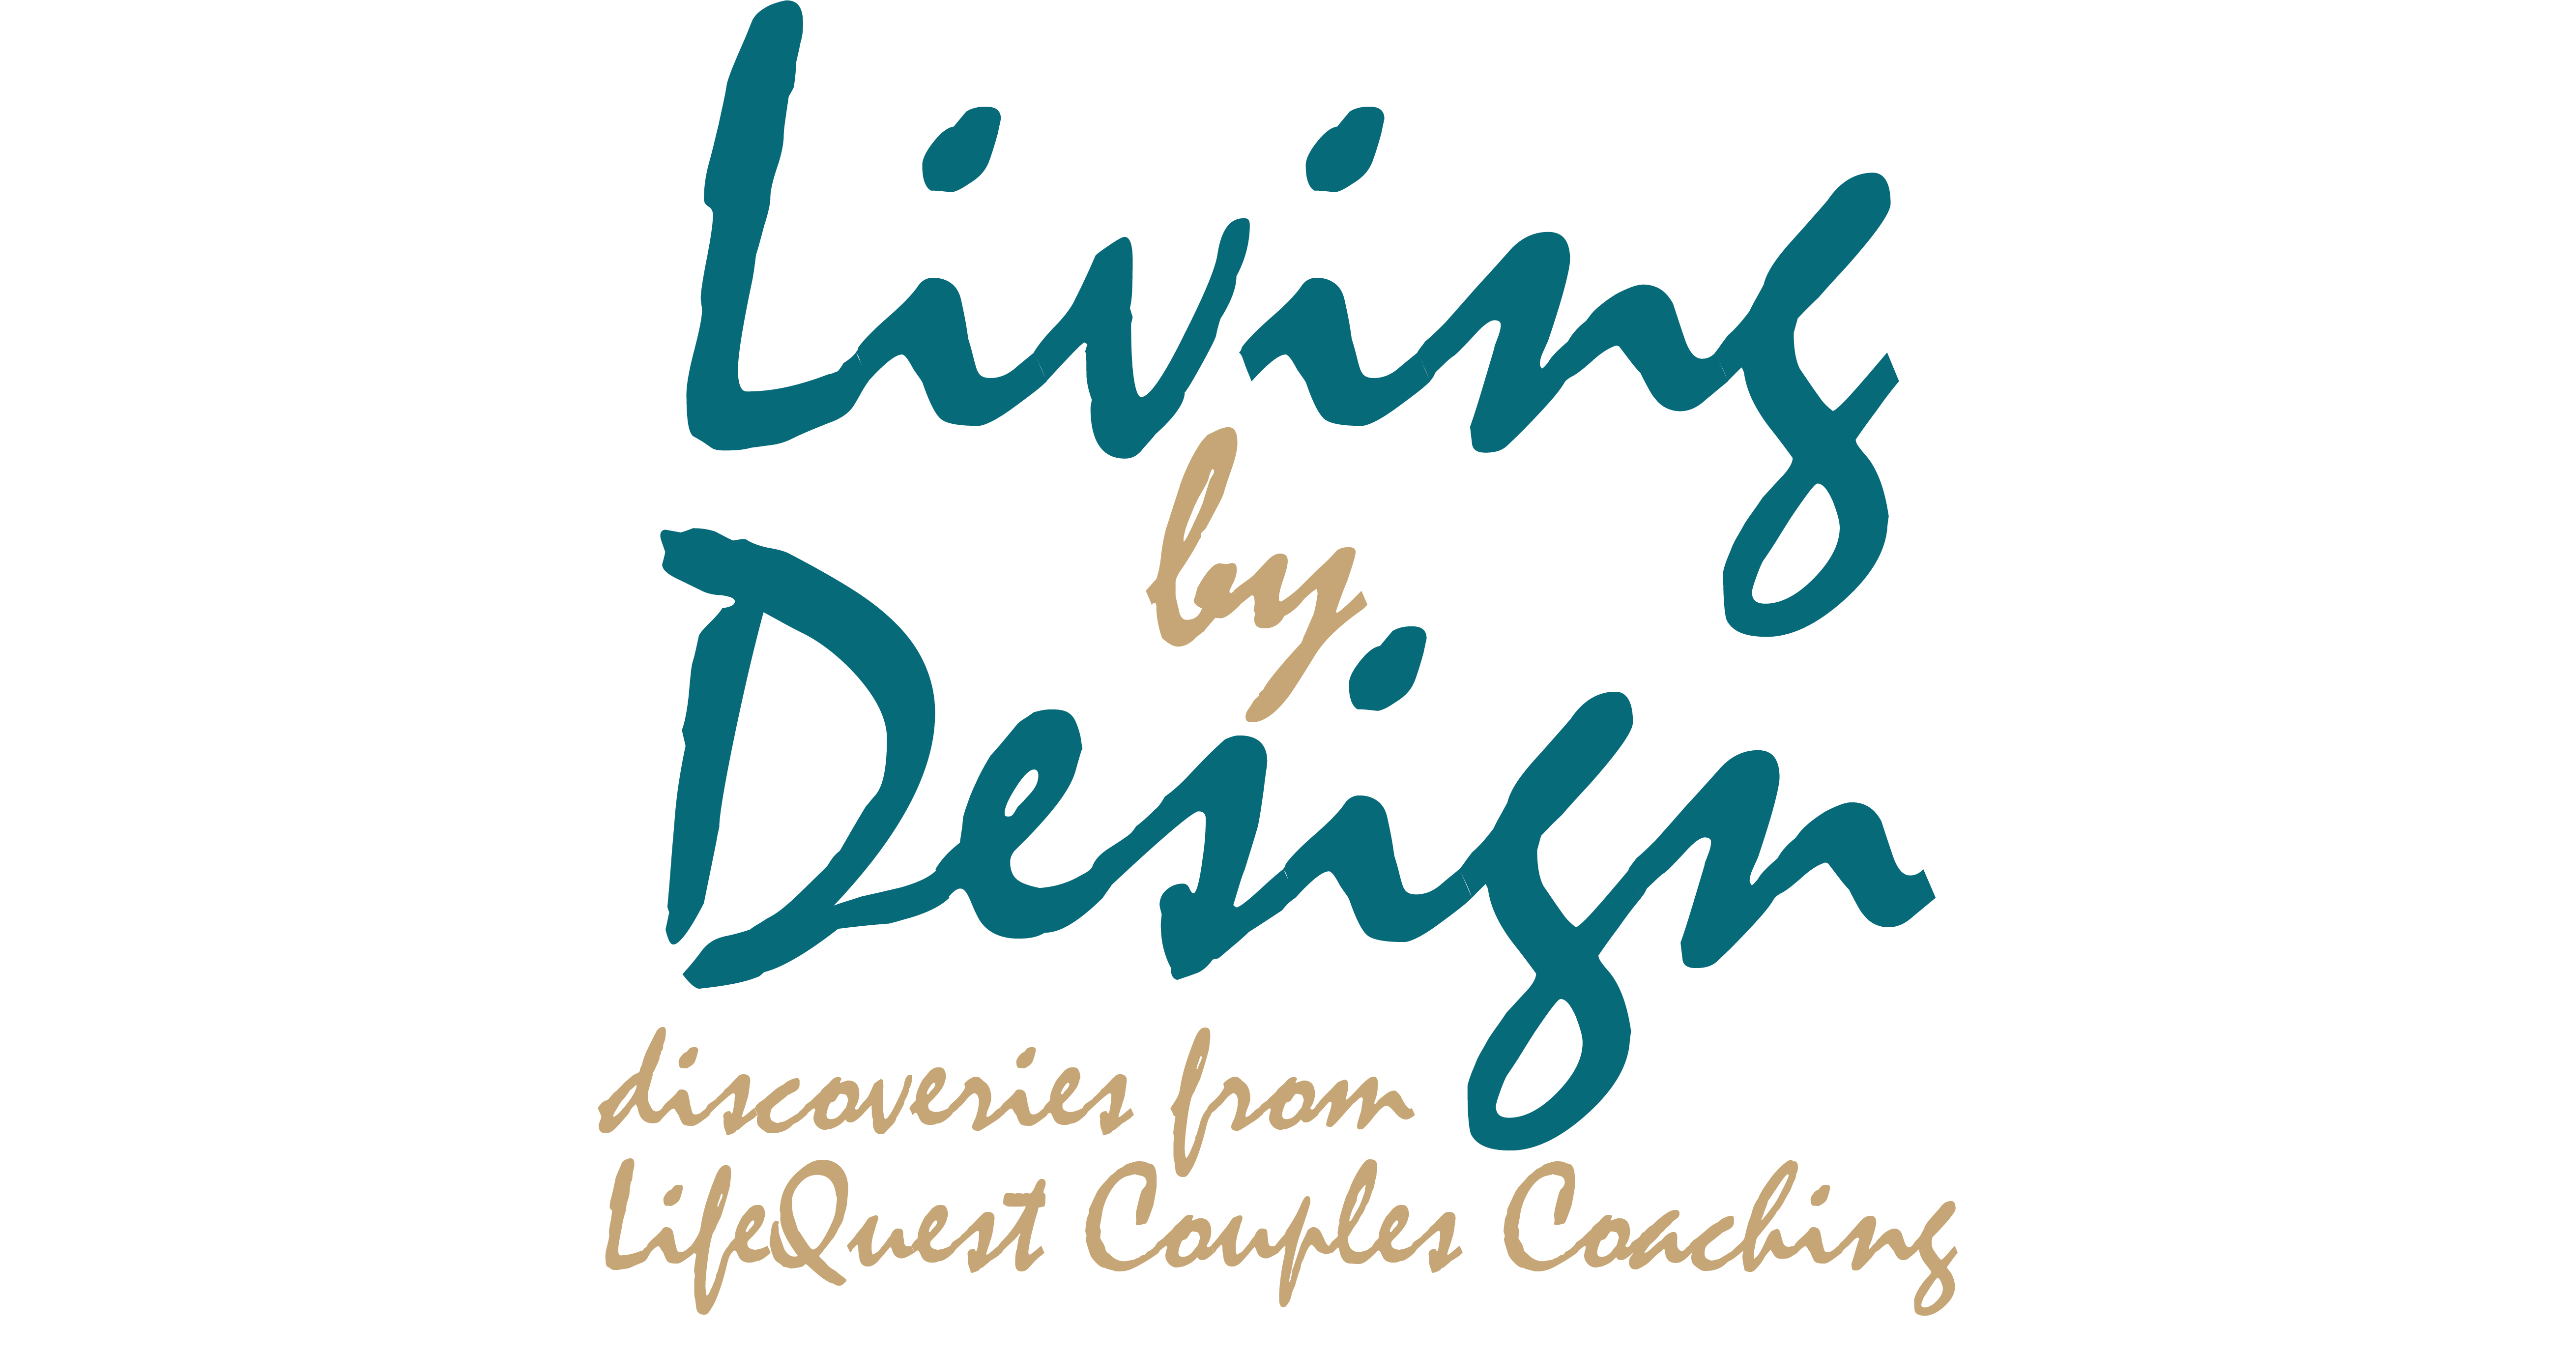 LifeQuest Couples Coaching